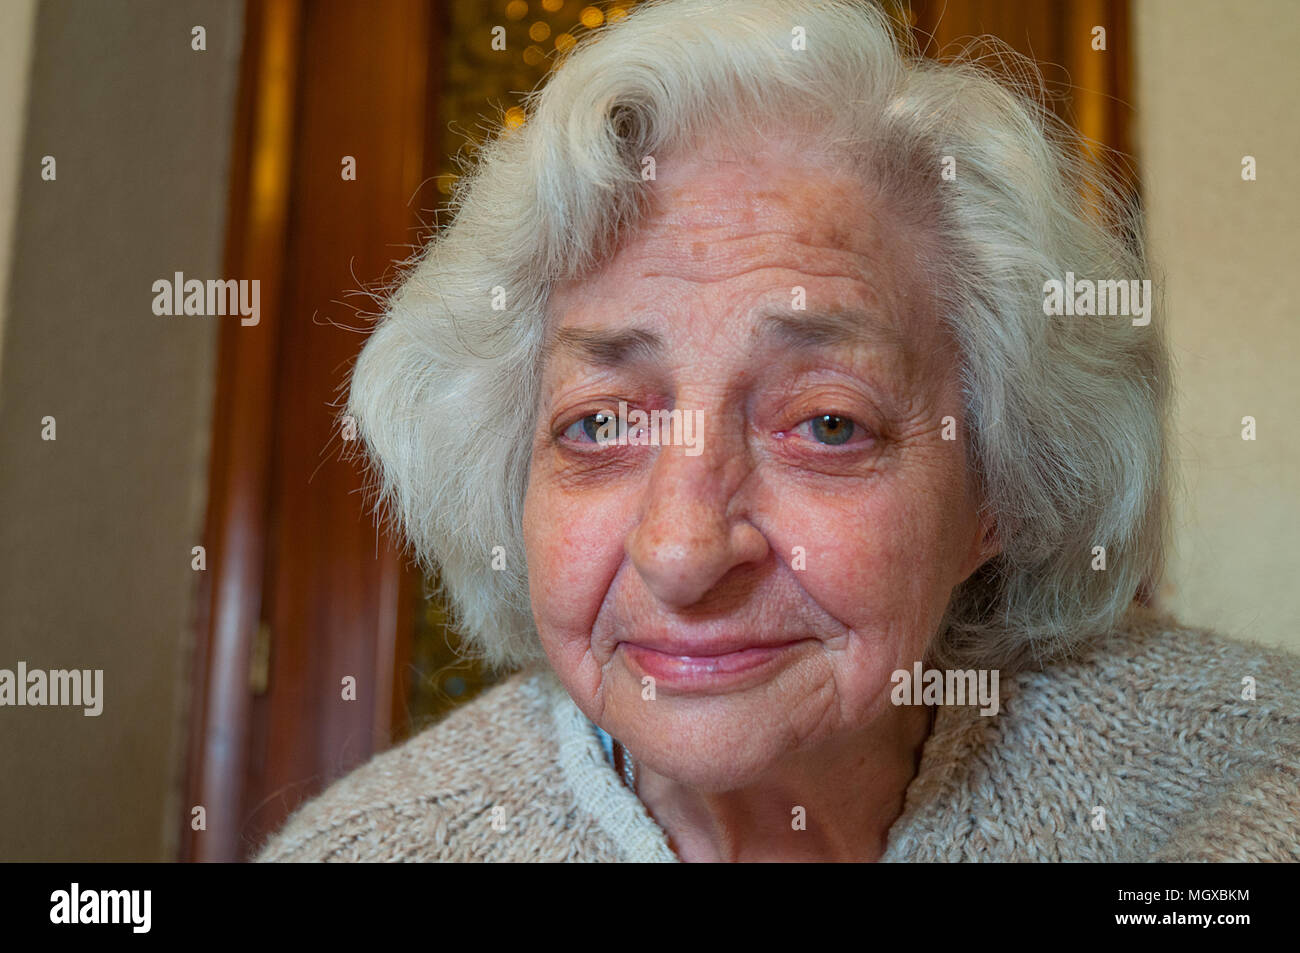 Old lady smiling and looking at the camera. Stock Photo